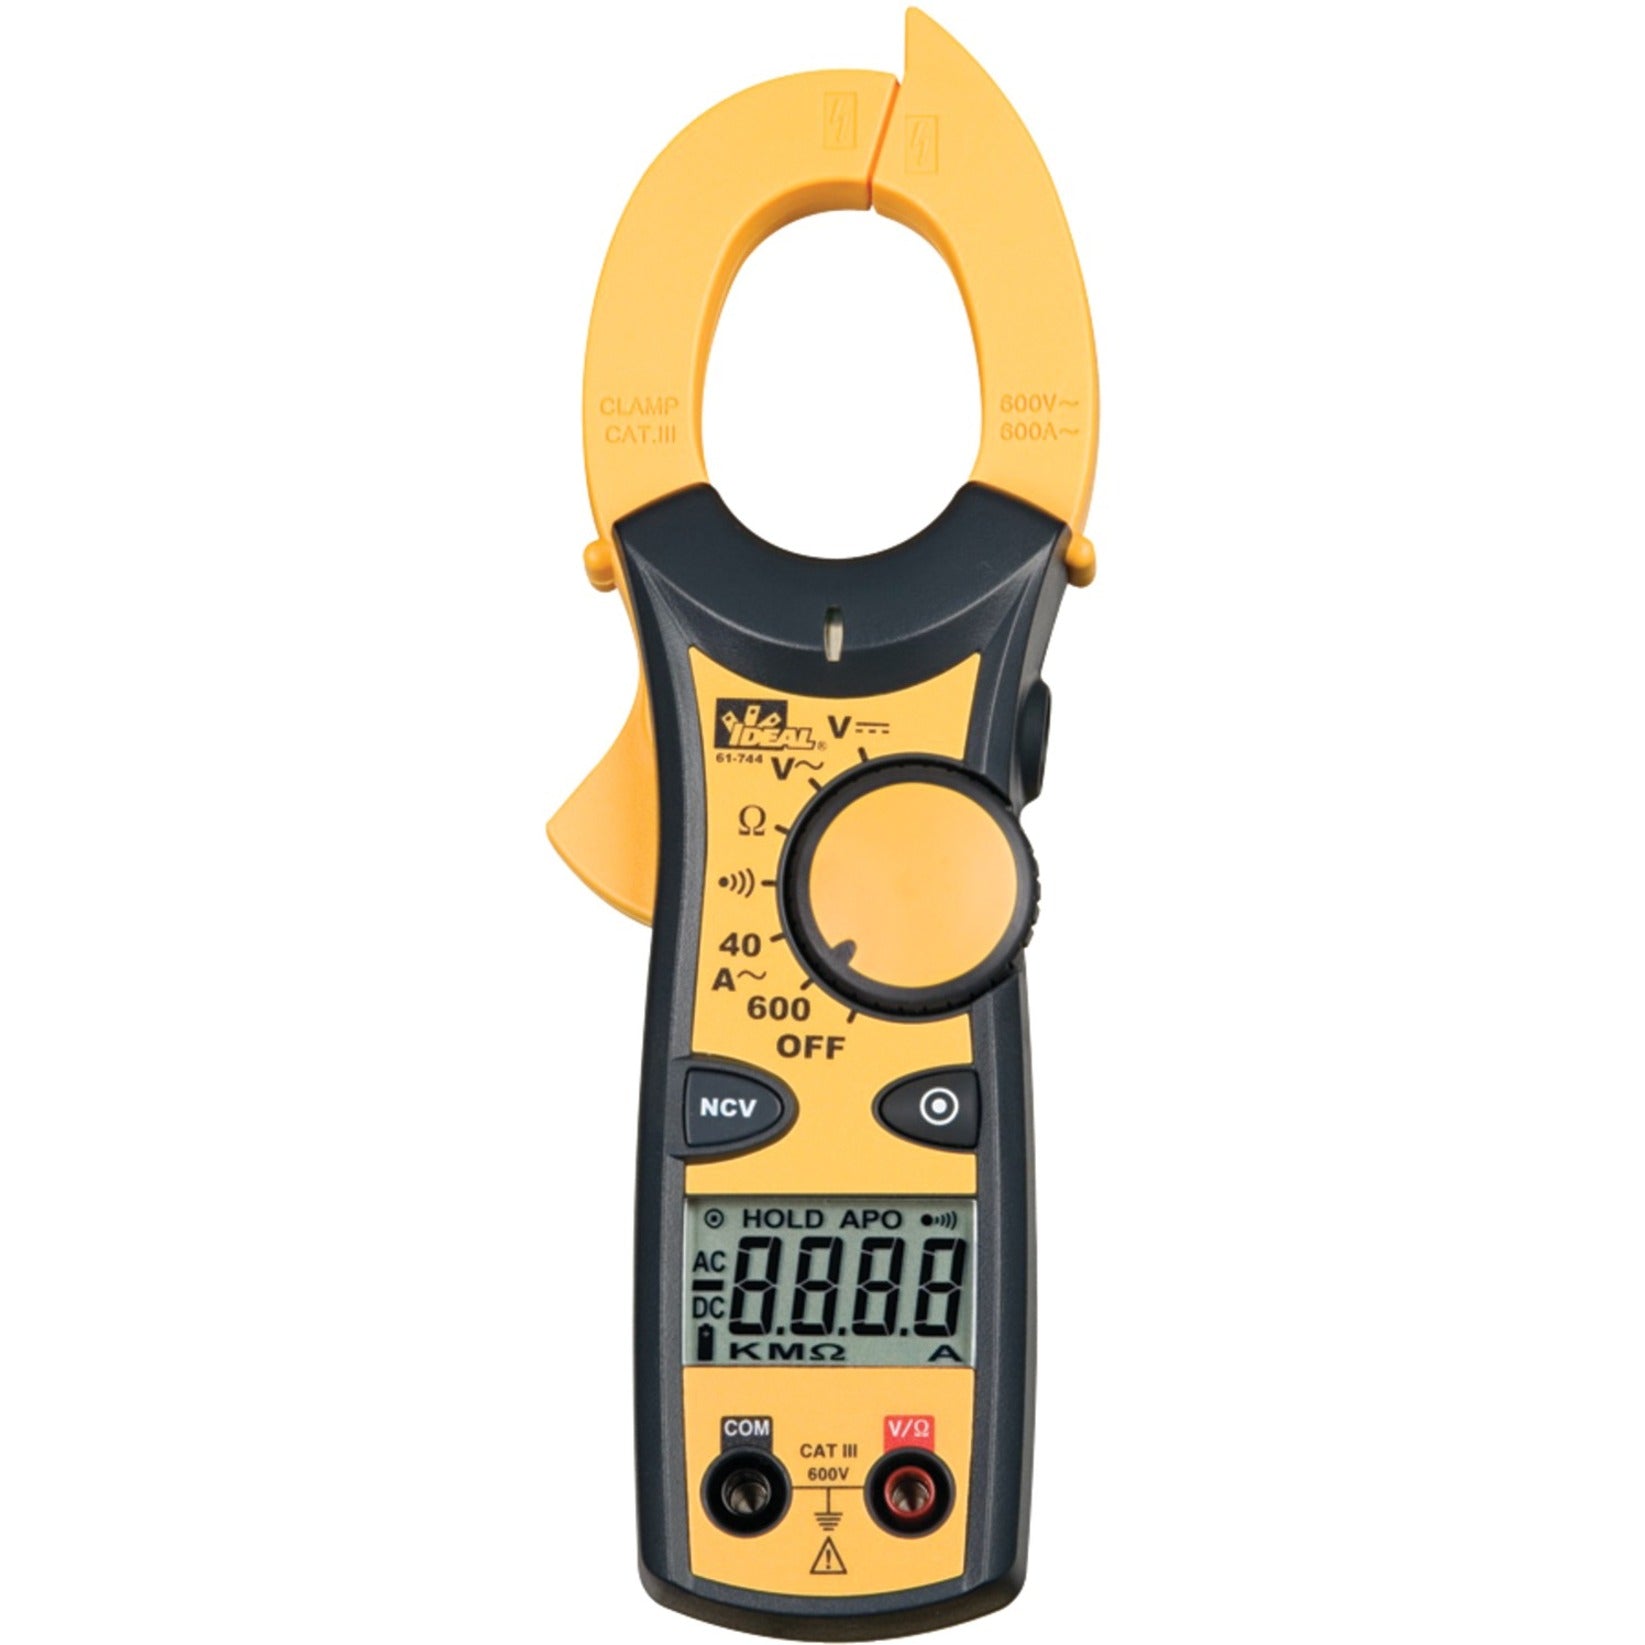 IDEAL Clamp-Pro Clamp Meters 600 Amp [Discontinued]